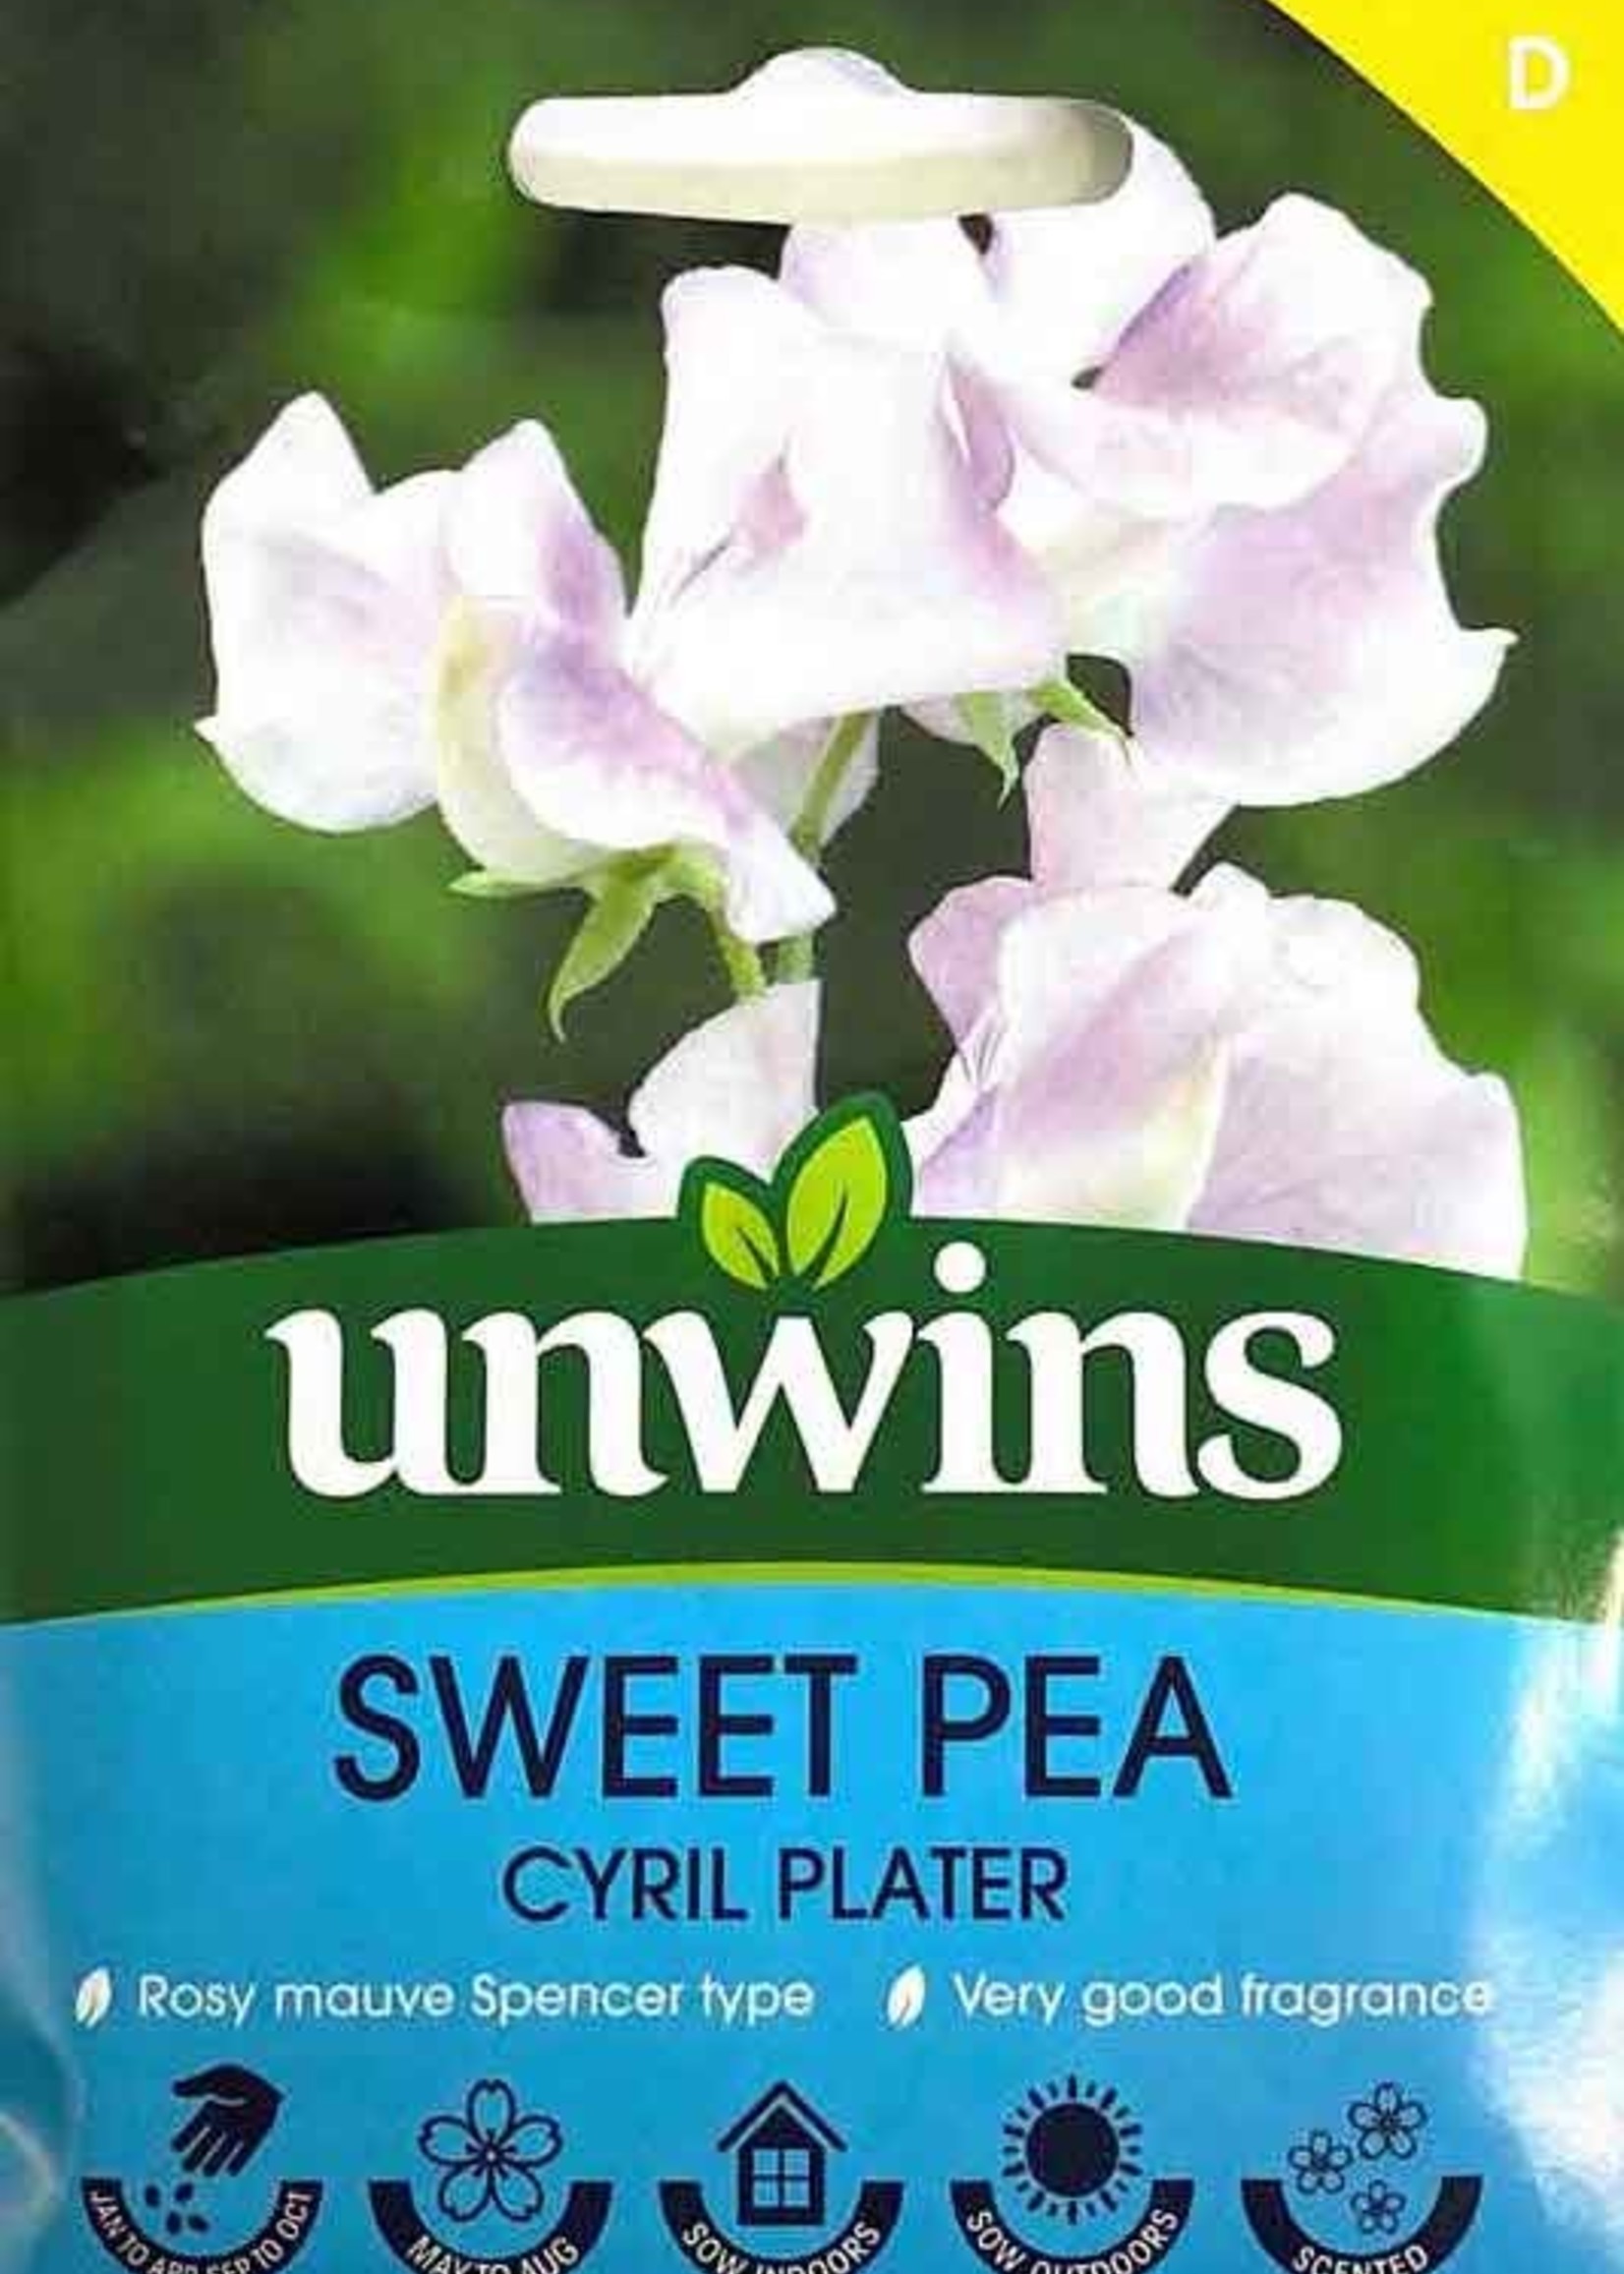 Unwins Sweet Pea - Cyril Plater